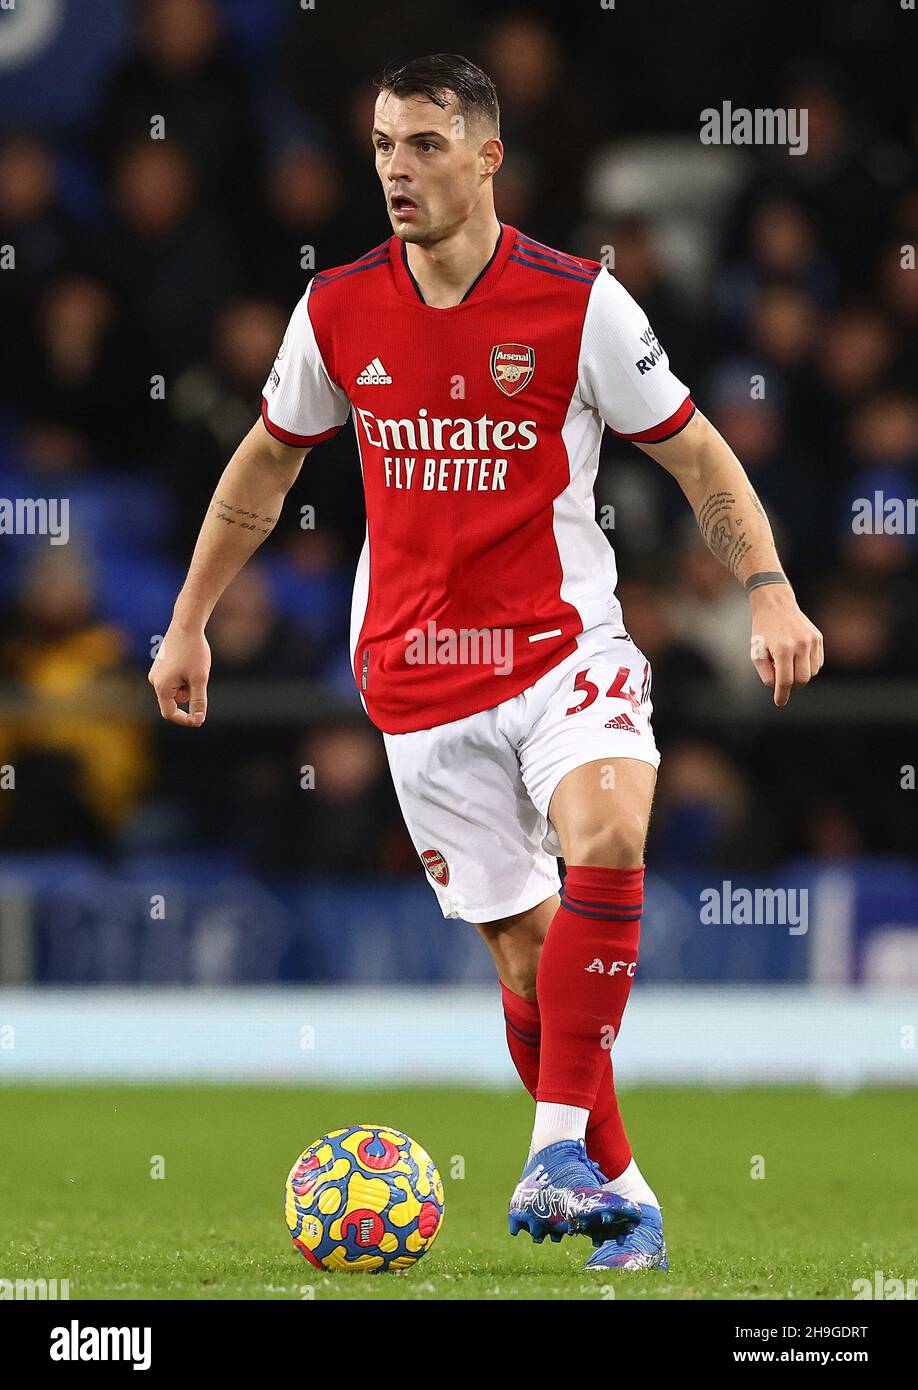 Liverpool, UK. 6th Dec, 2021. Granit Xhaka of Arsenal during the Premier League match at Goodison Park, Liverpool. Picture credit should read: Darren Staples/Sportimage Credit: Sportimage/Alamy Live News Stock Photo